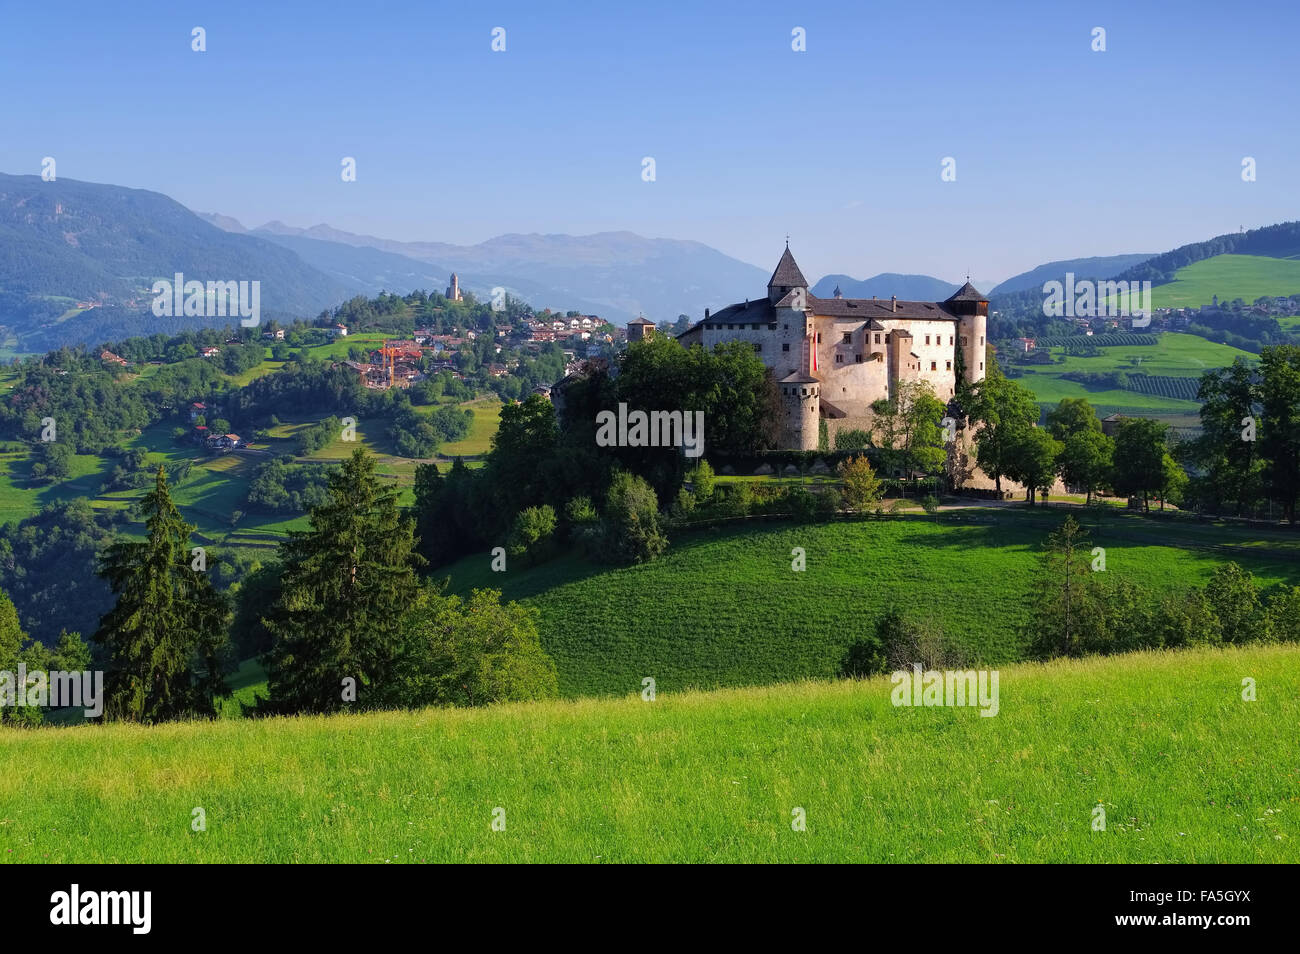 Proesels Schloss - Proesels castle 02 Stock Photo